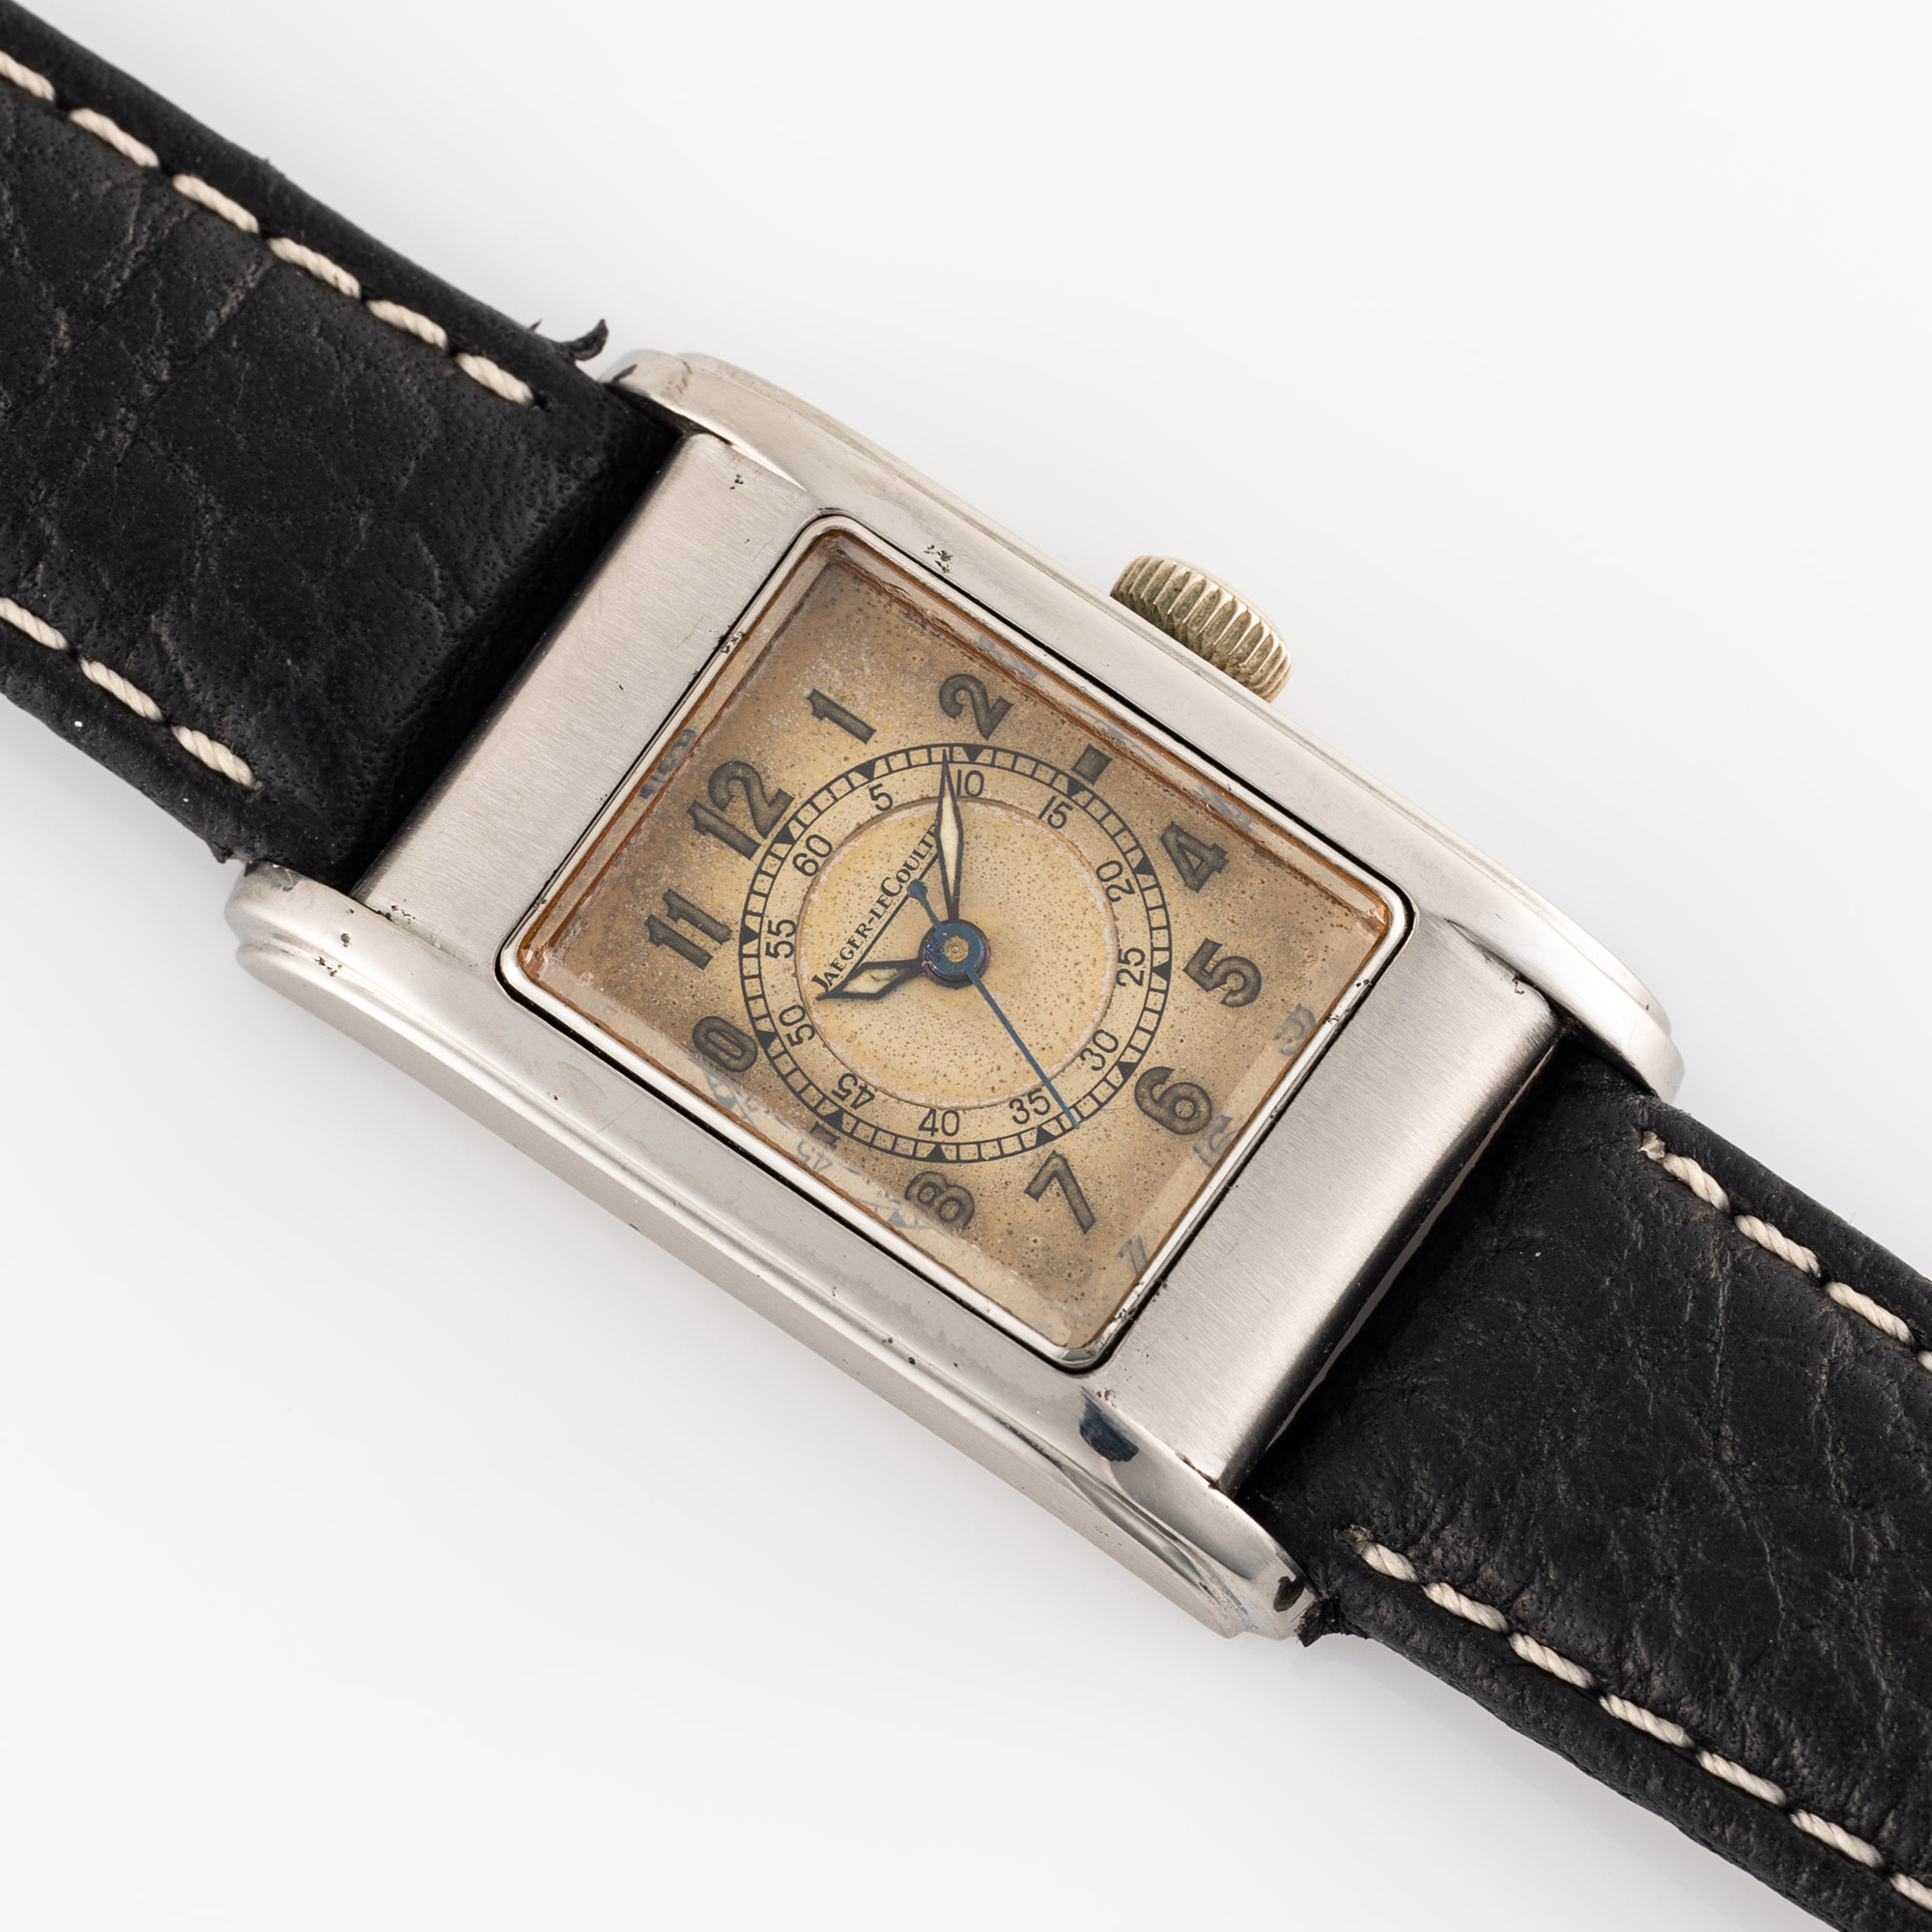 A GENTLEMAN'S SIZE STAINLESS STEEL JAEGER LECOULTRE ETANCHE WRIST WATCH CIRCA 1930s EARLY PATENTED - Image 4 of 7